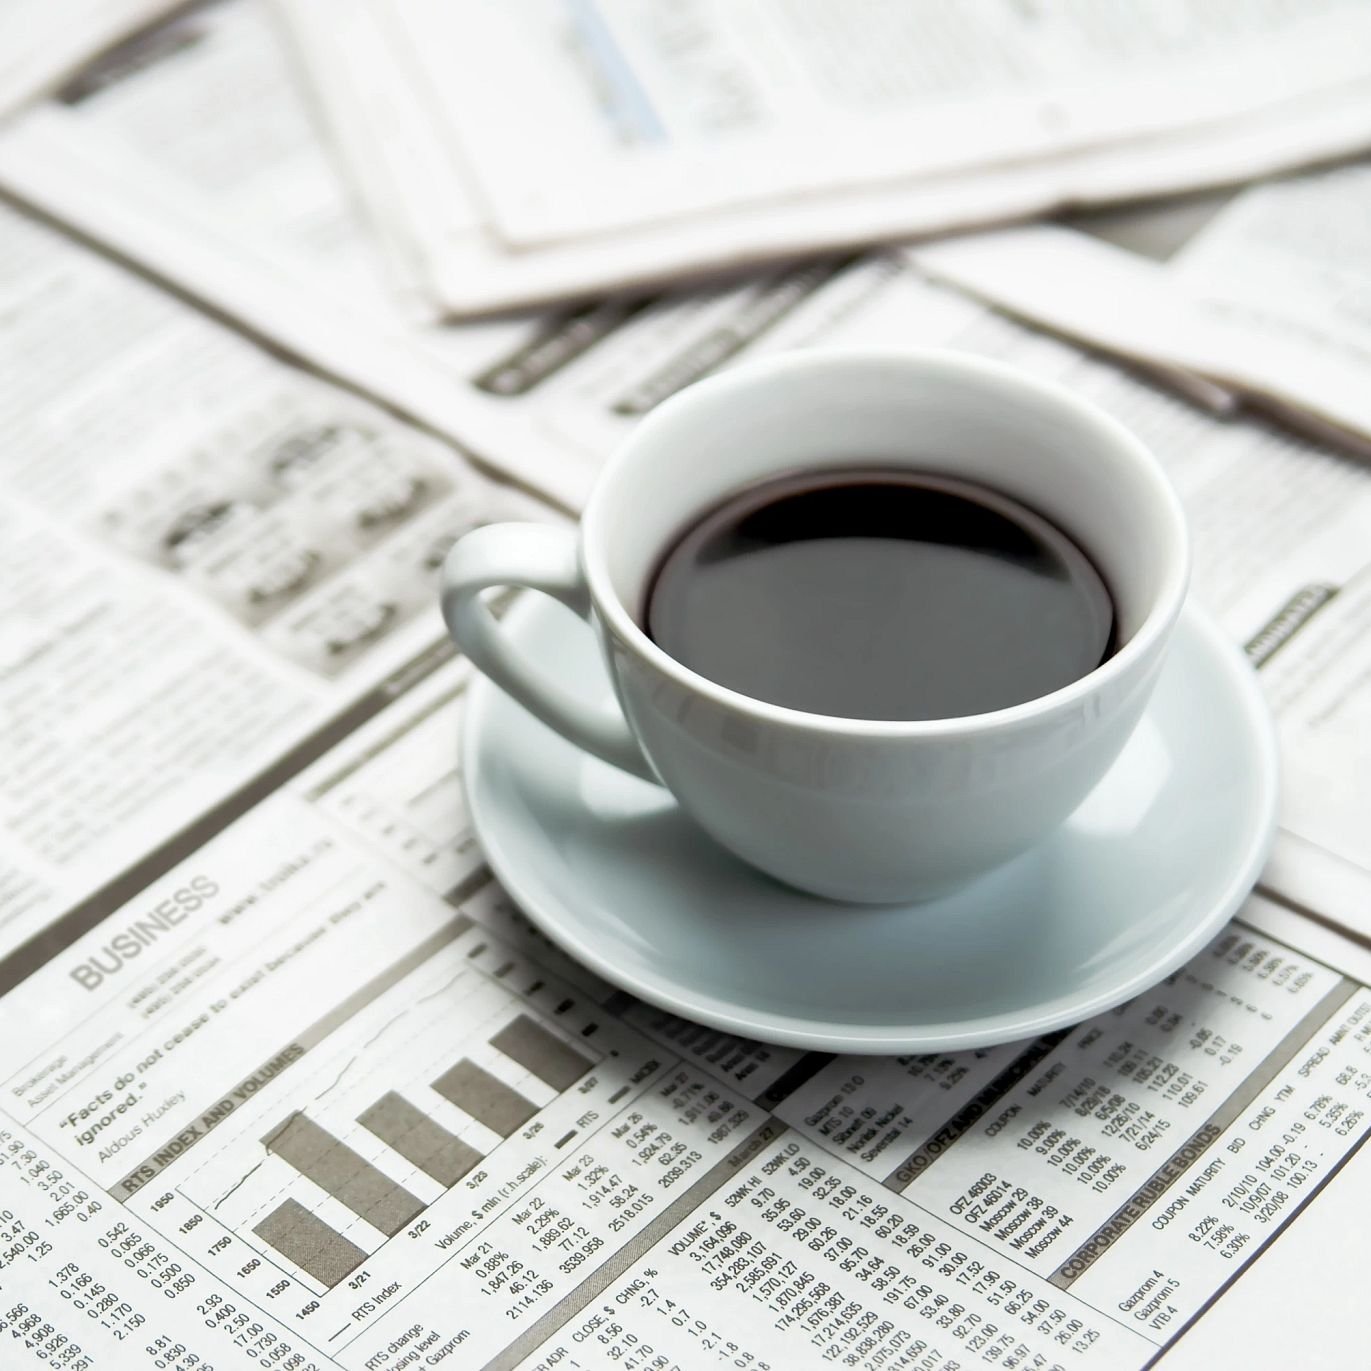 coffee cup on newspaper - Carpet Wholesale Outlet in GA